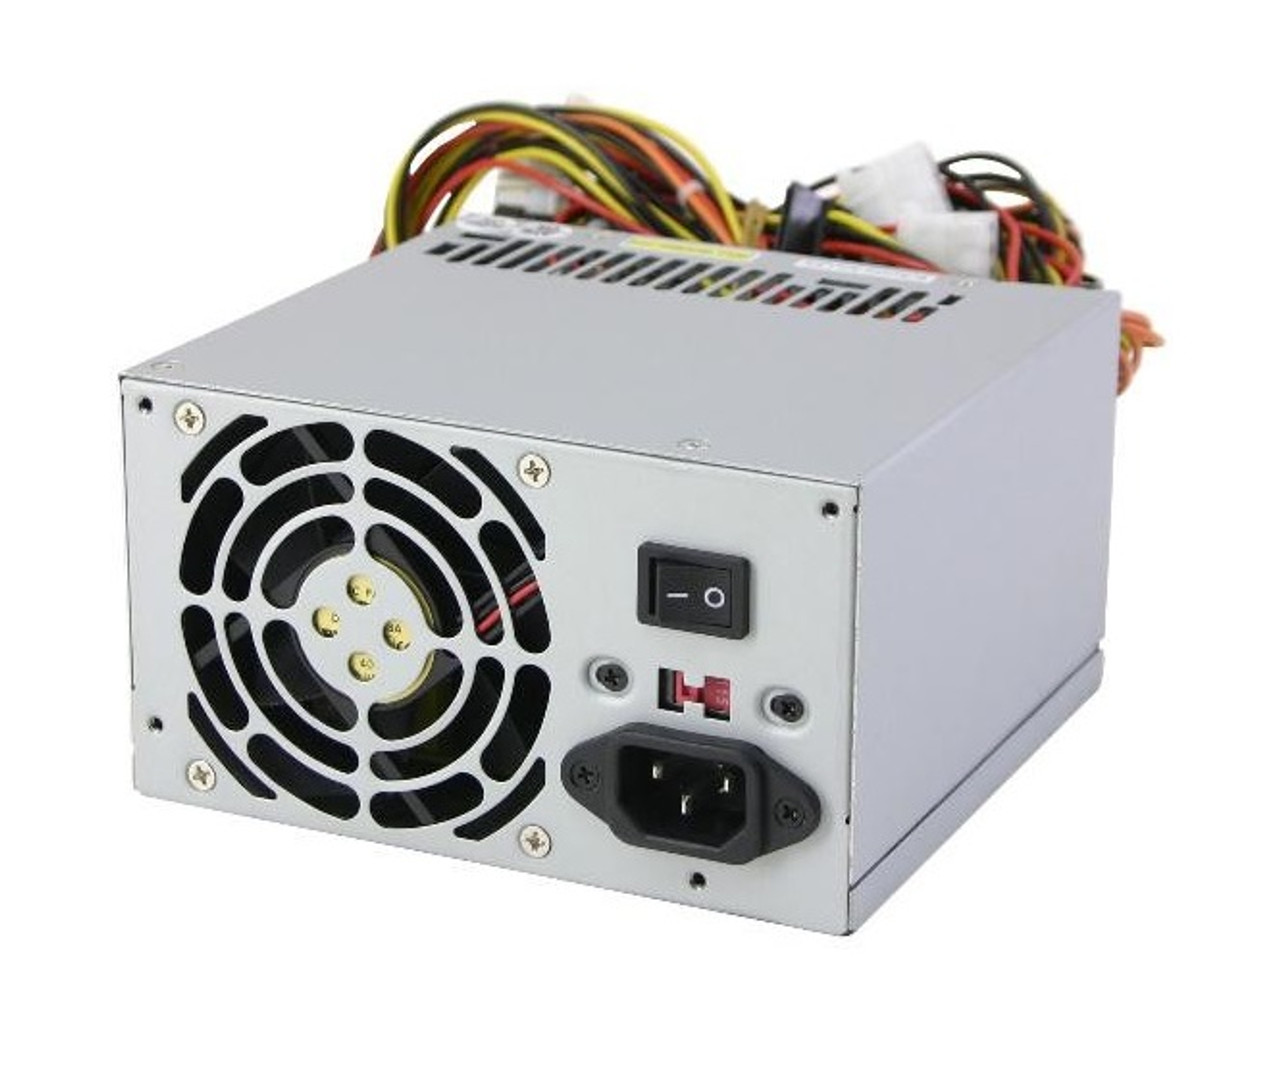 HSTNS-PC03 - HP 2250-Watts Power Supply for BladeSystem C7000 Enclosure